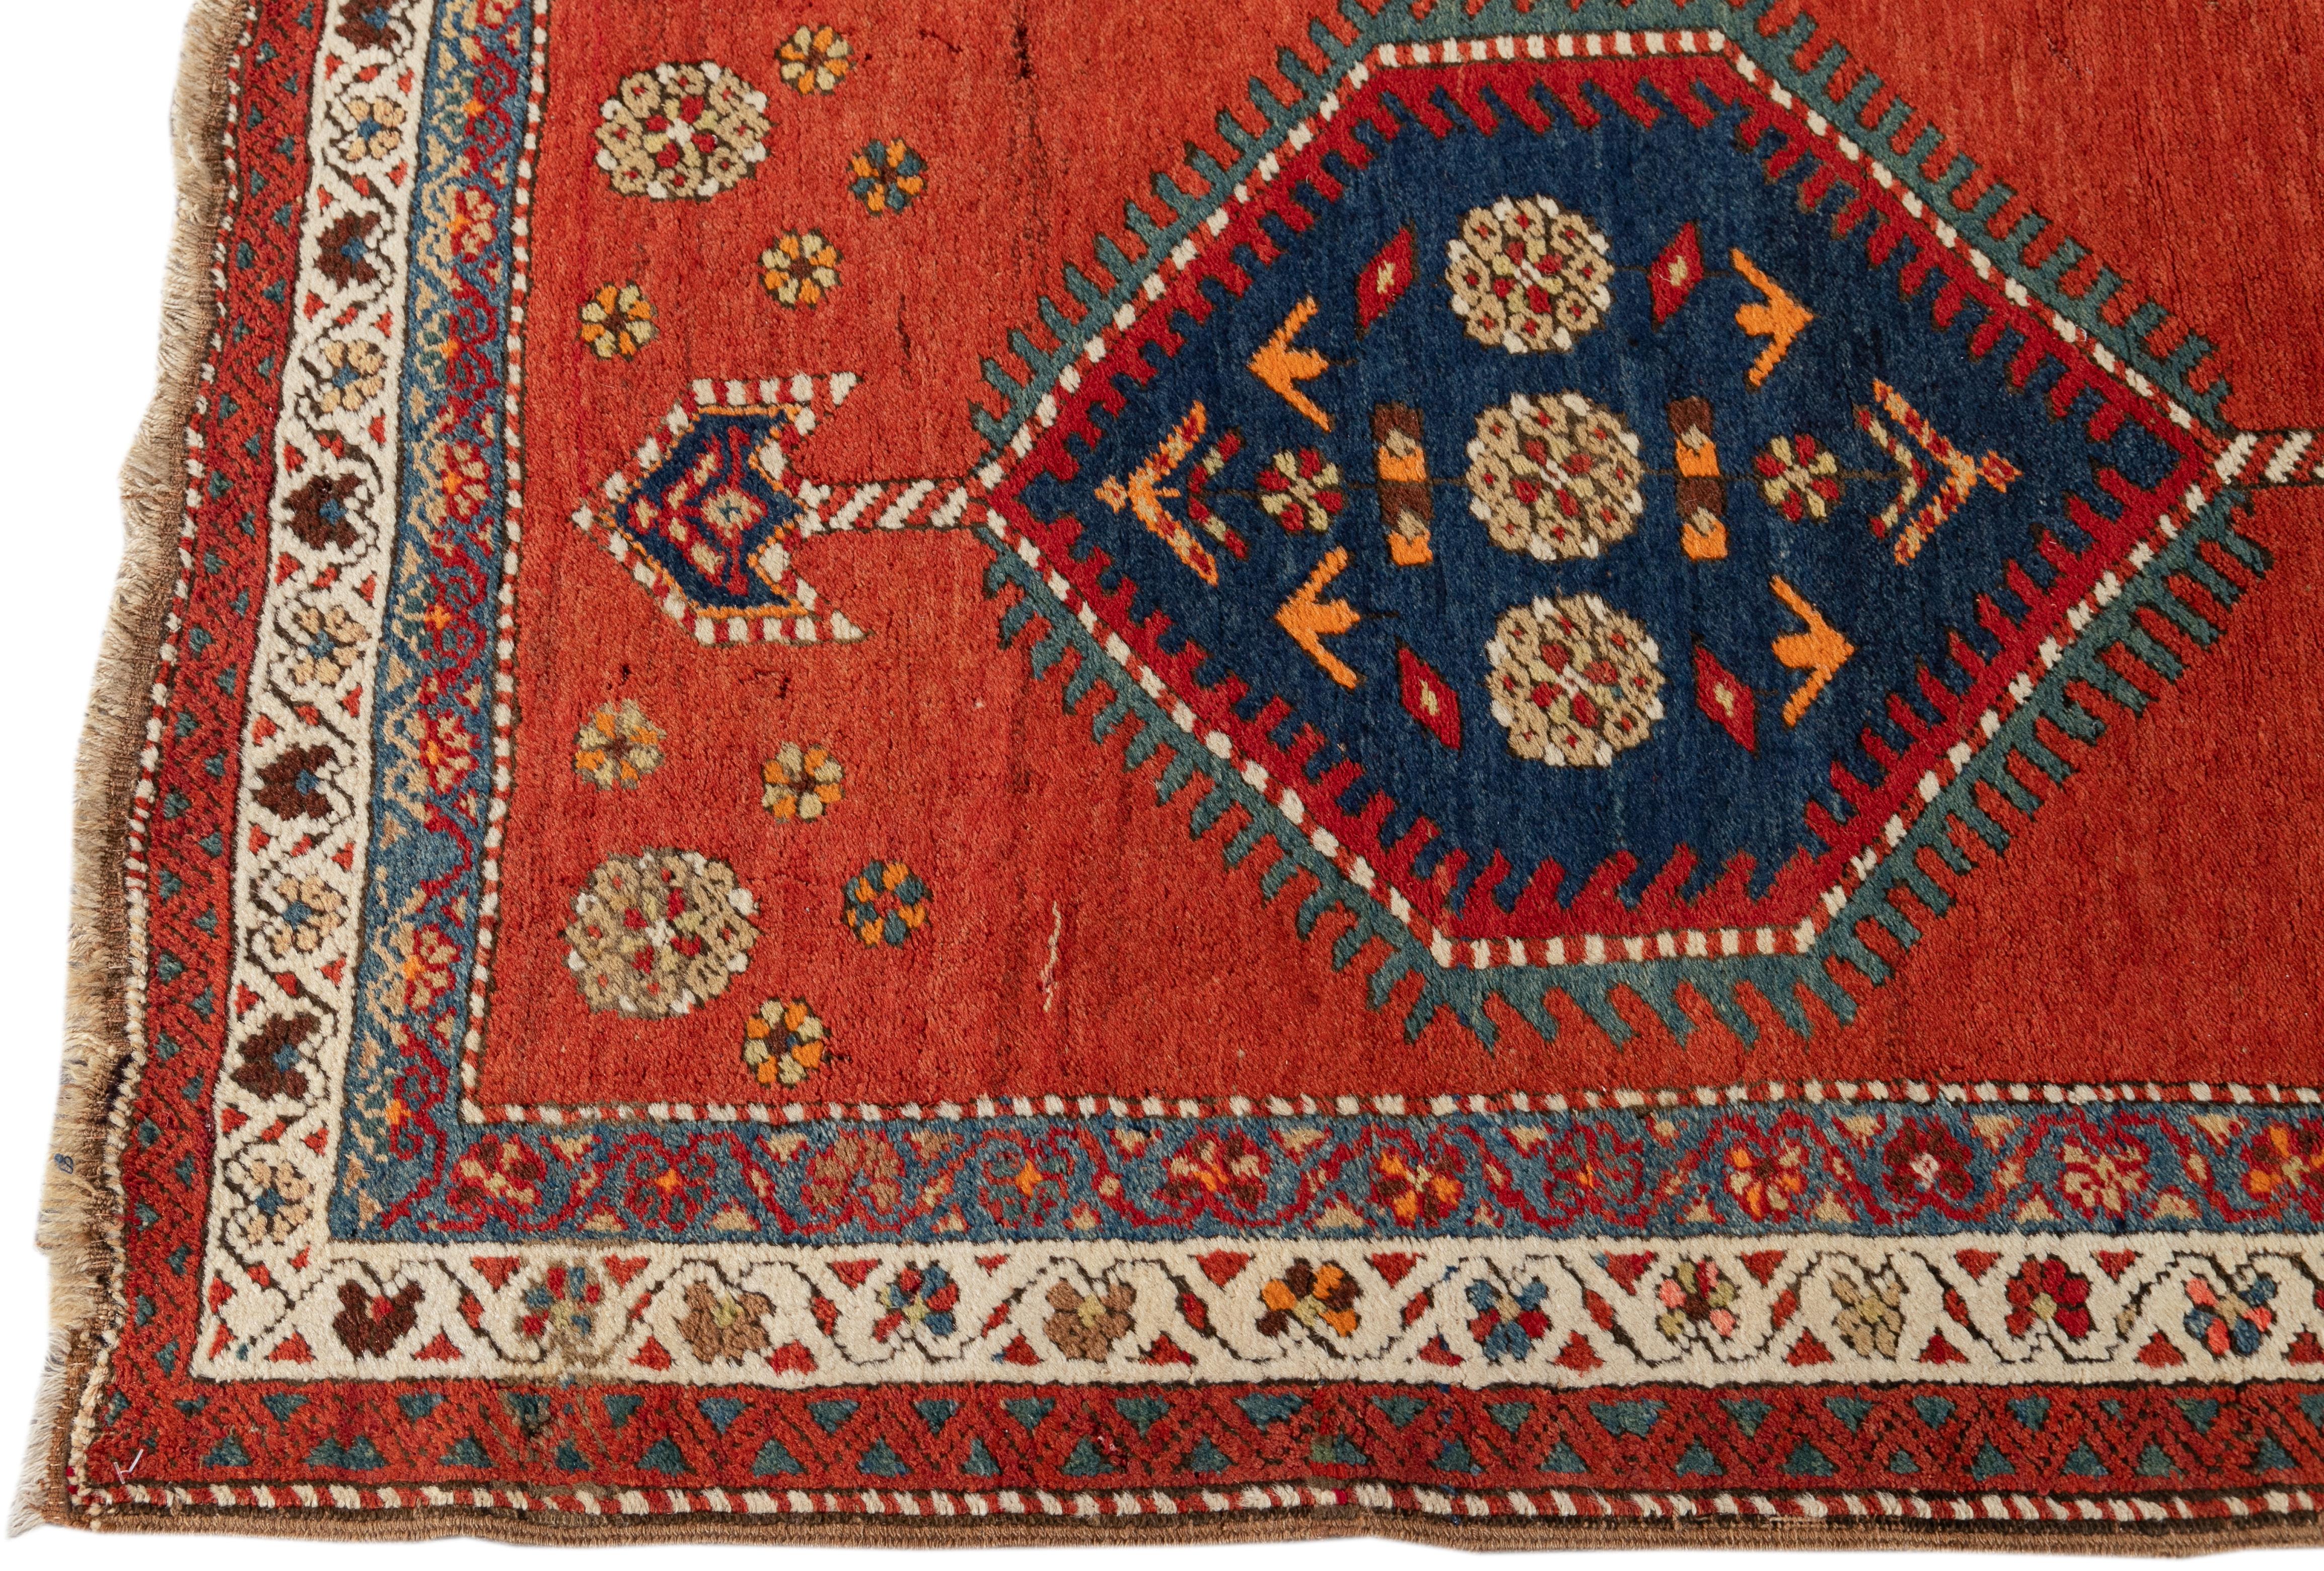 Beautiful 20th-century Heriz hand-knotted wool runner with a rust-orange field. This Piece has multicolor accents in a gorgeous tribal design.

This rug measures: 3'3